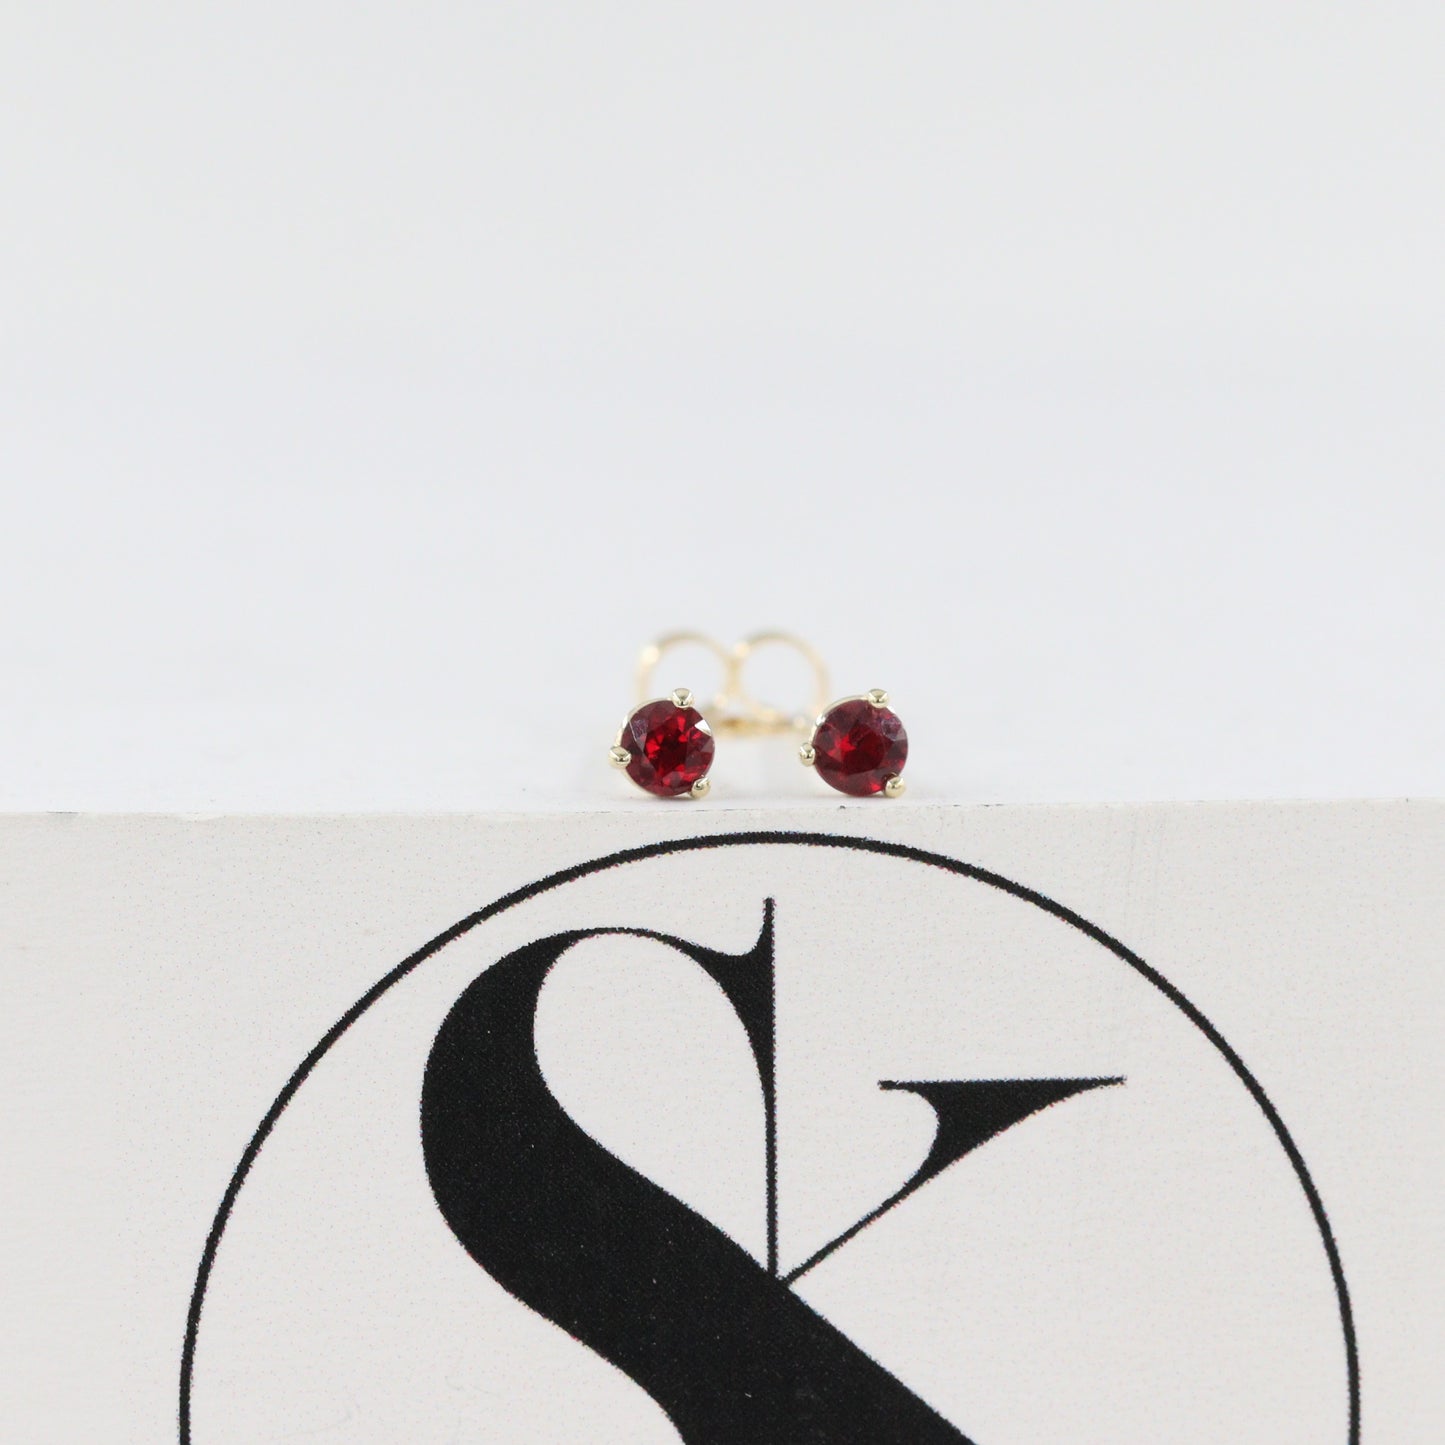 Natural Ruby Stud Earrings/Three Prong Set Round Ruby 0.1ct Stud Earrings/Single or Pair Ruby Stud Earrings/Gifts for her/Anniversary gift